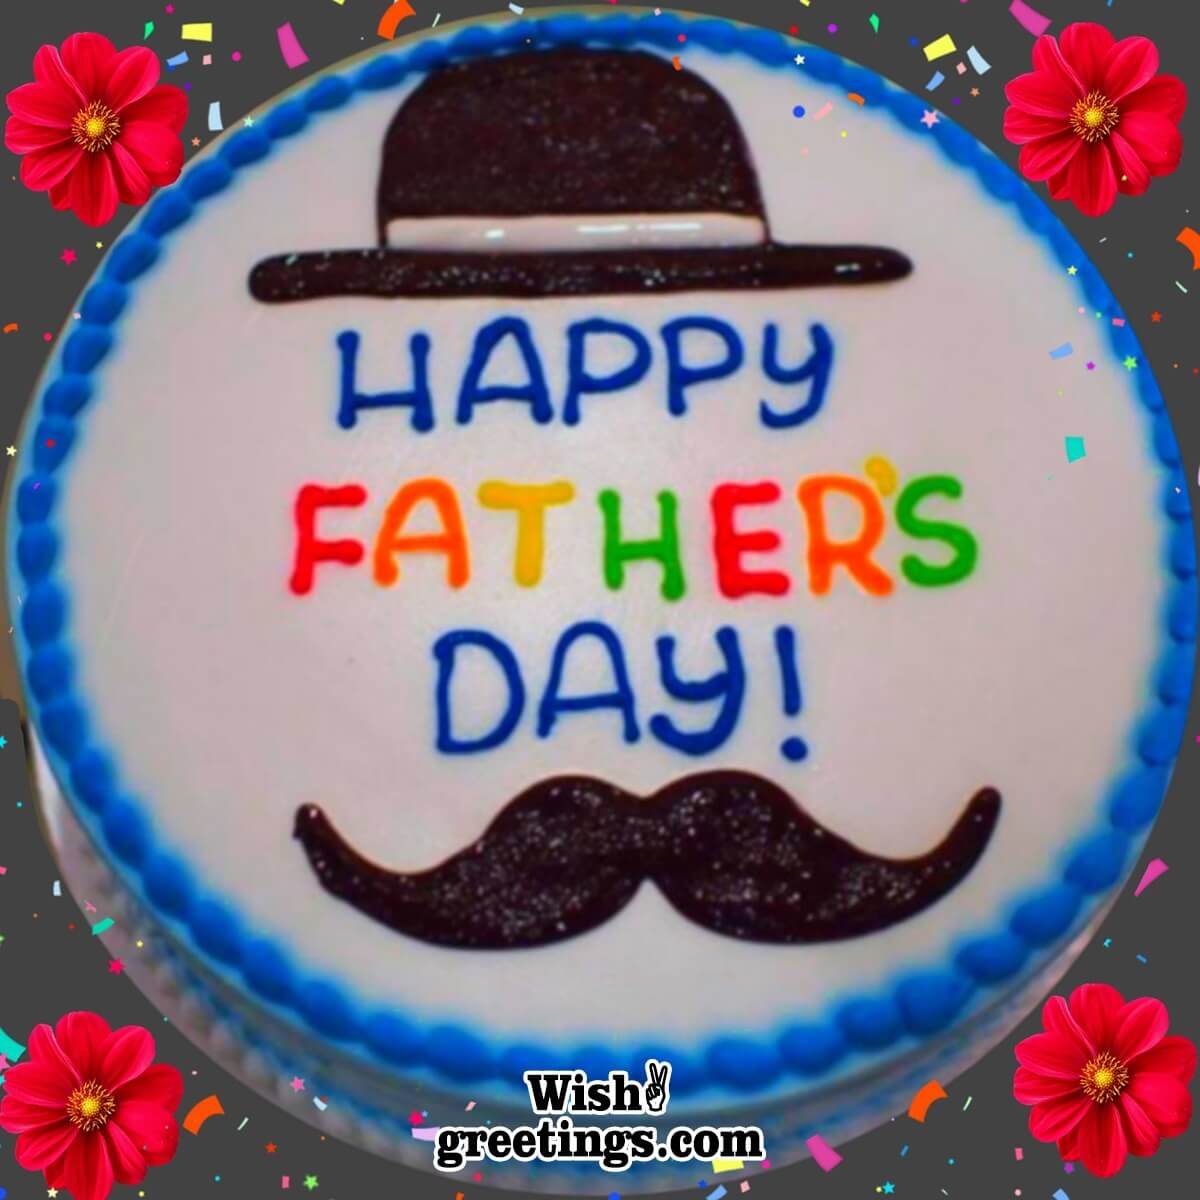 Happy Father's Day Cake